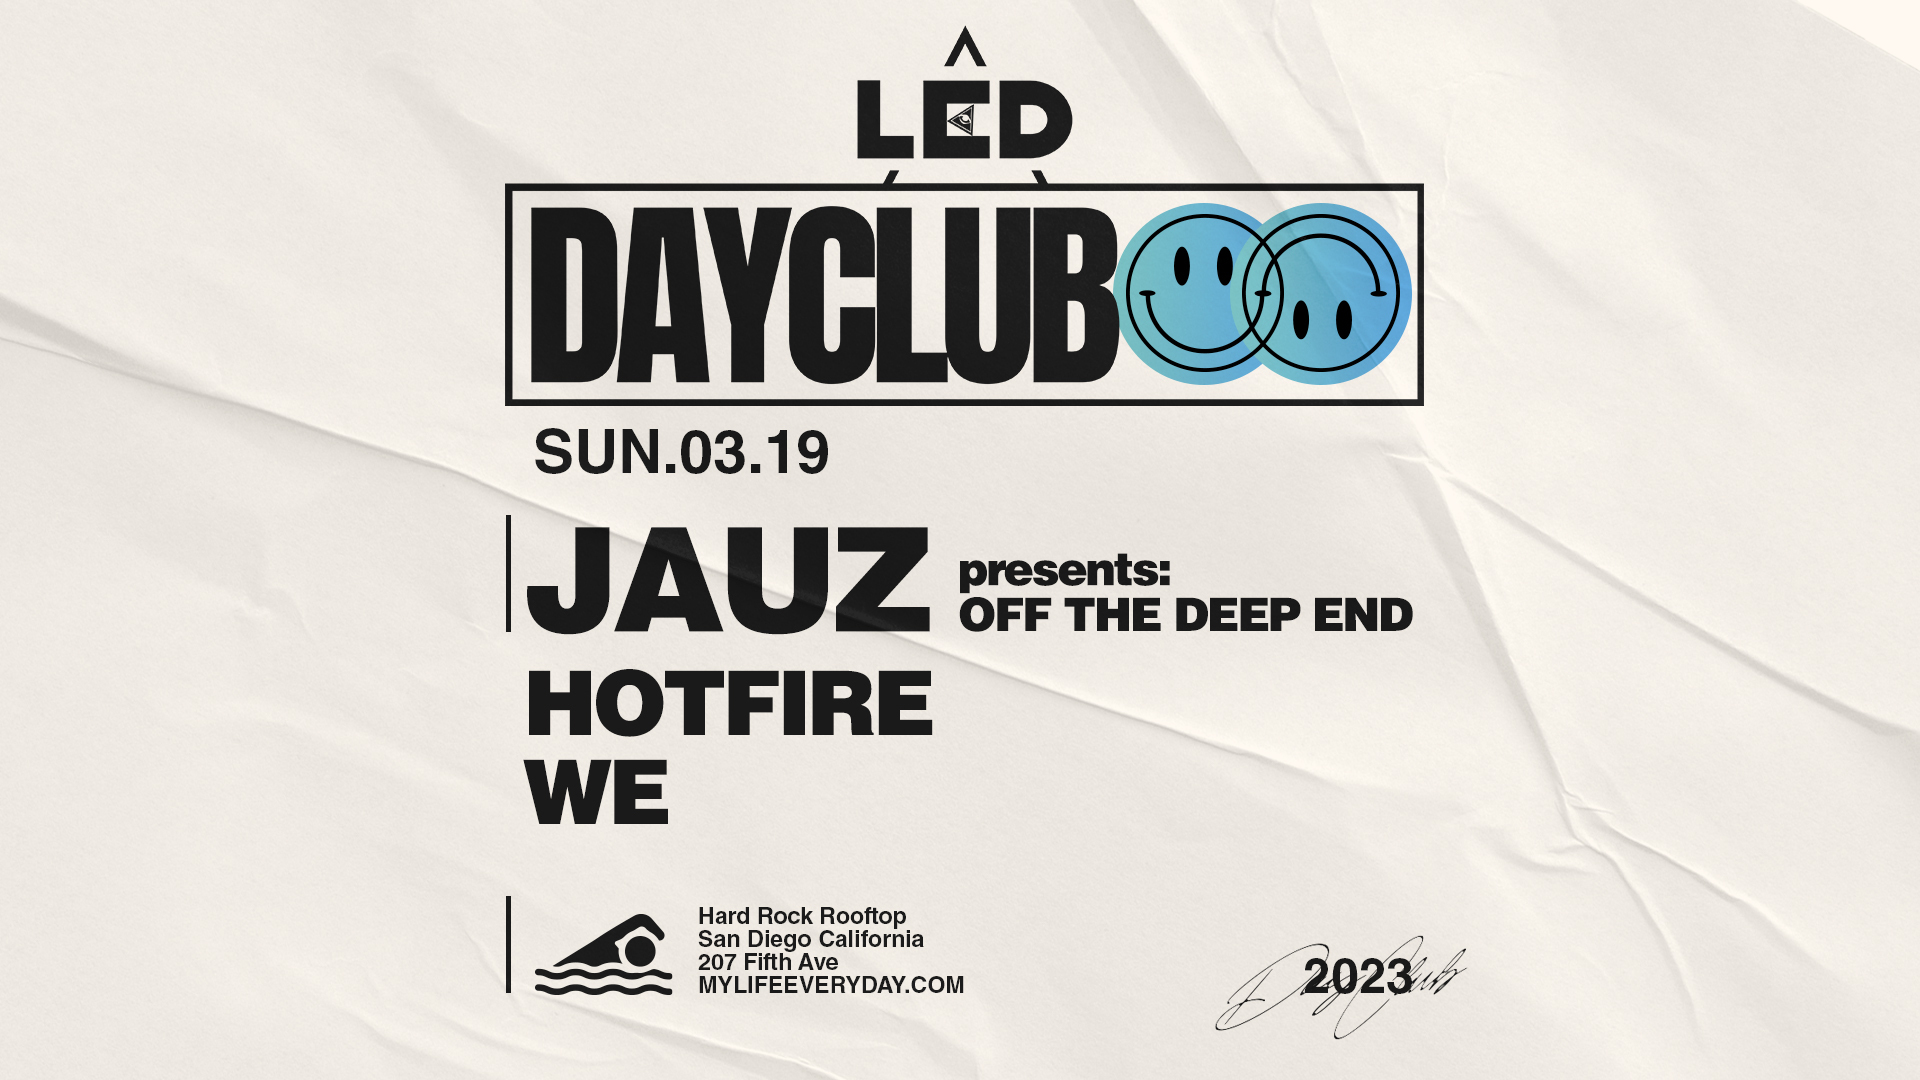 LED Day Club: Jauz presents Off The Deep End